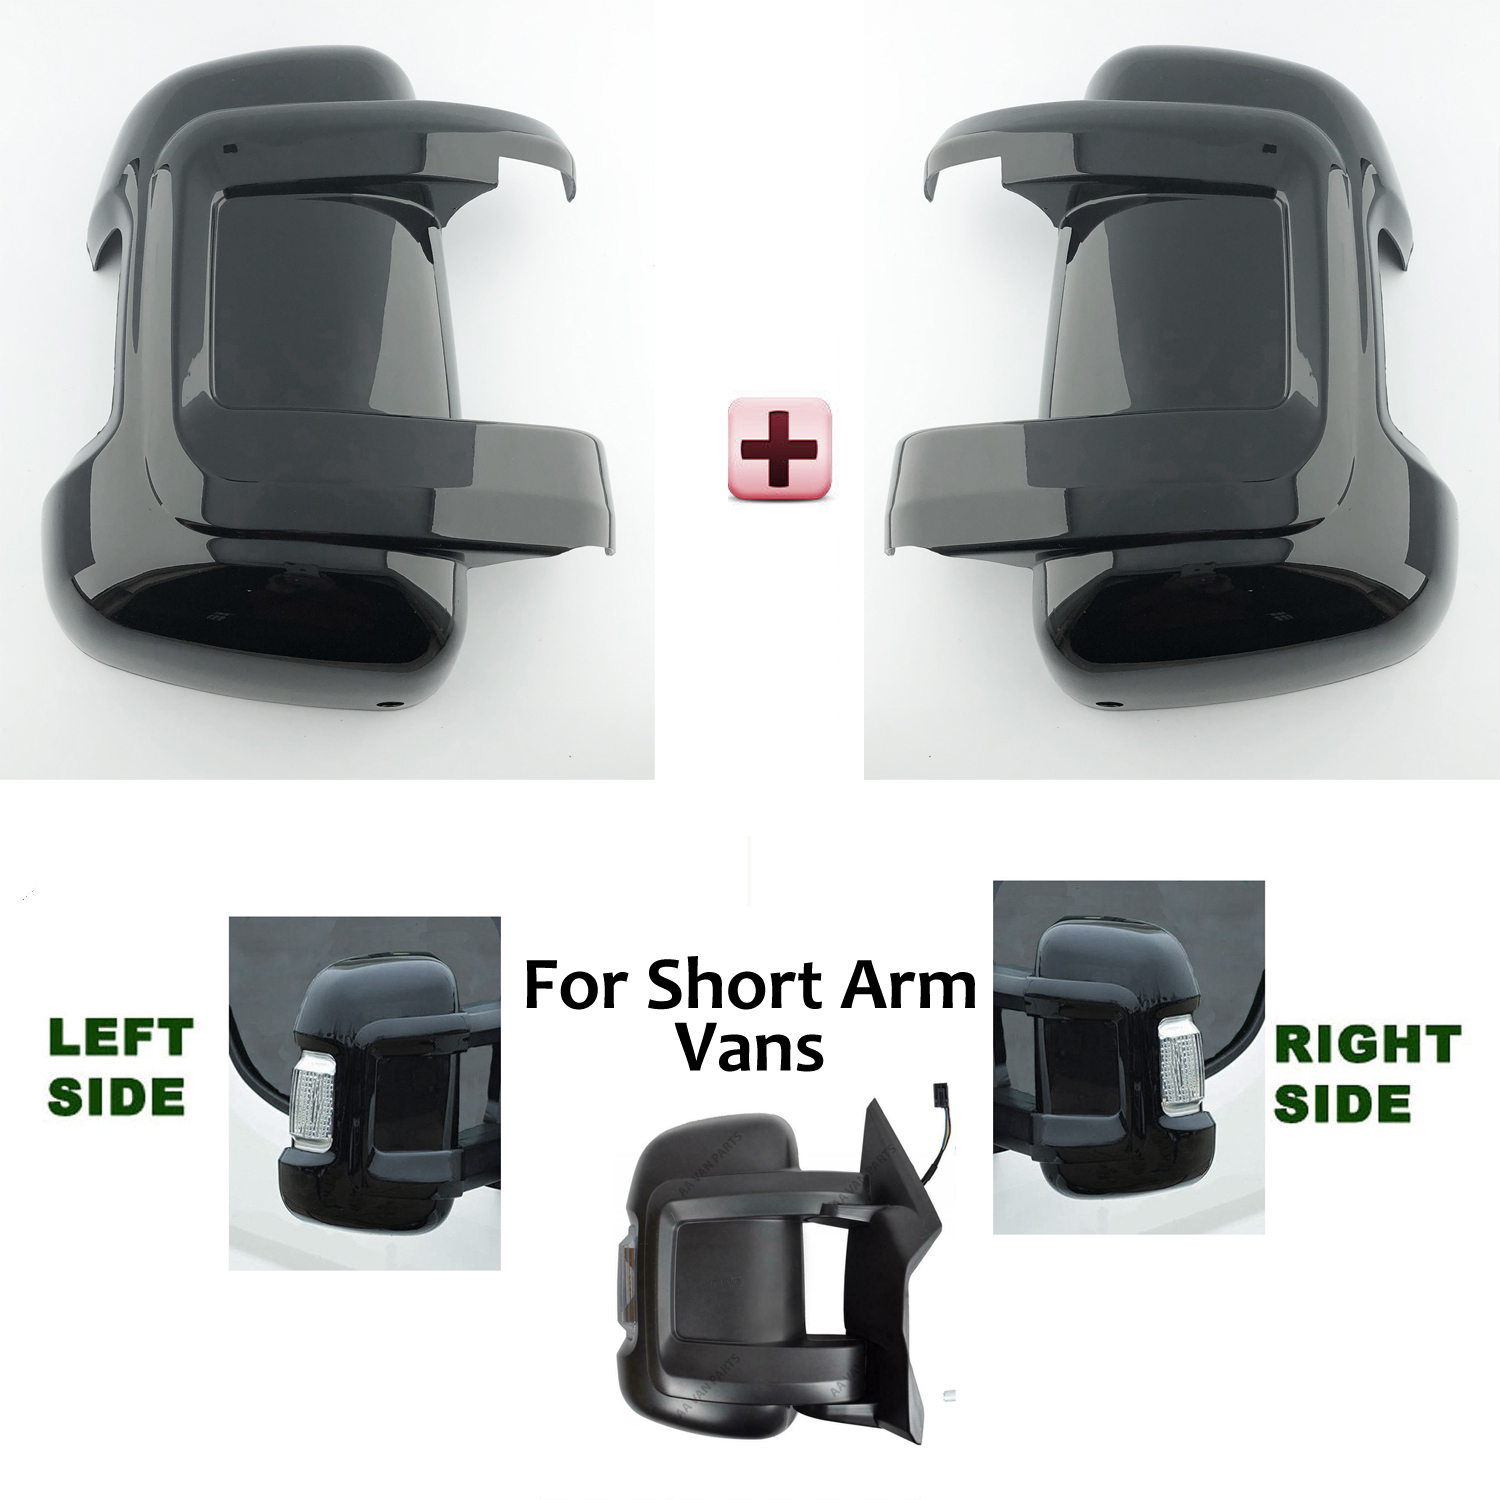 FIAT Ducato Wing Mirror Cover Protectors LEFT and RIGHT (PAIR ) 2006 to 2021 – GLOSS BLACK Wing Mirror Cover Protector